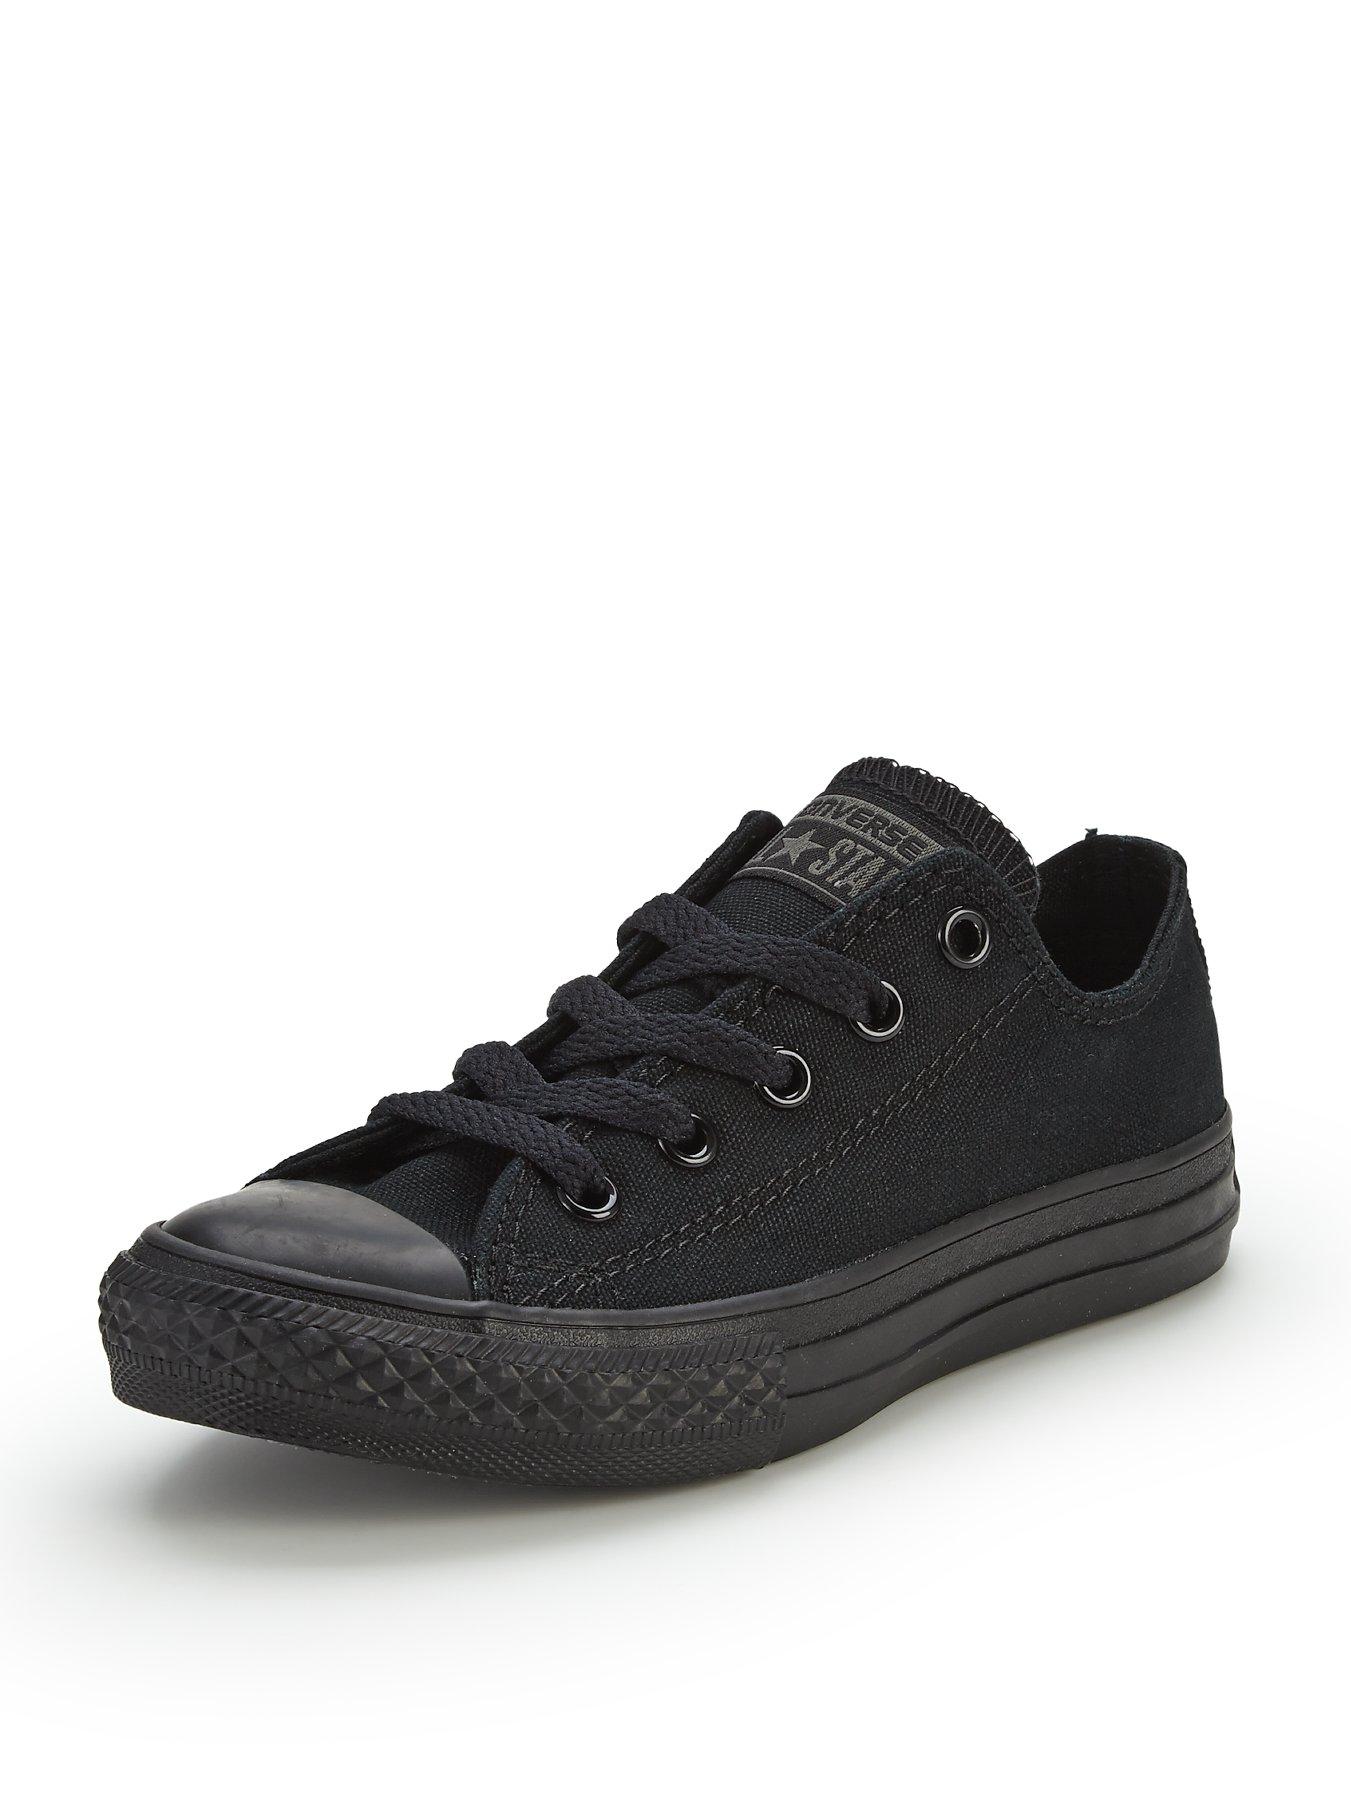 converse all star ox trainers black